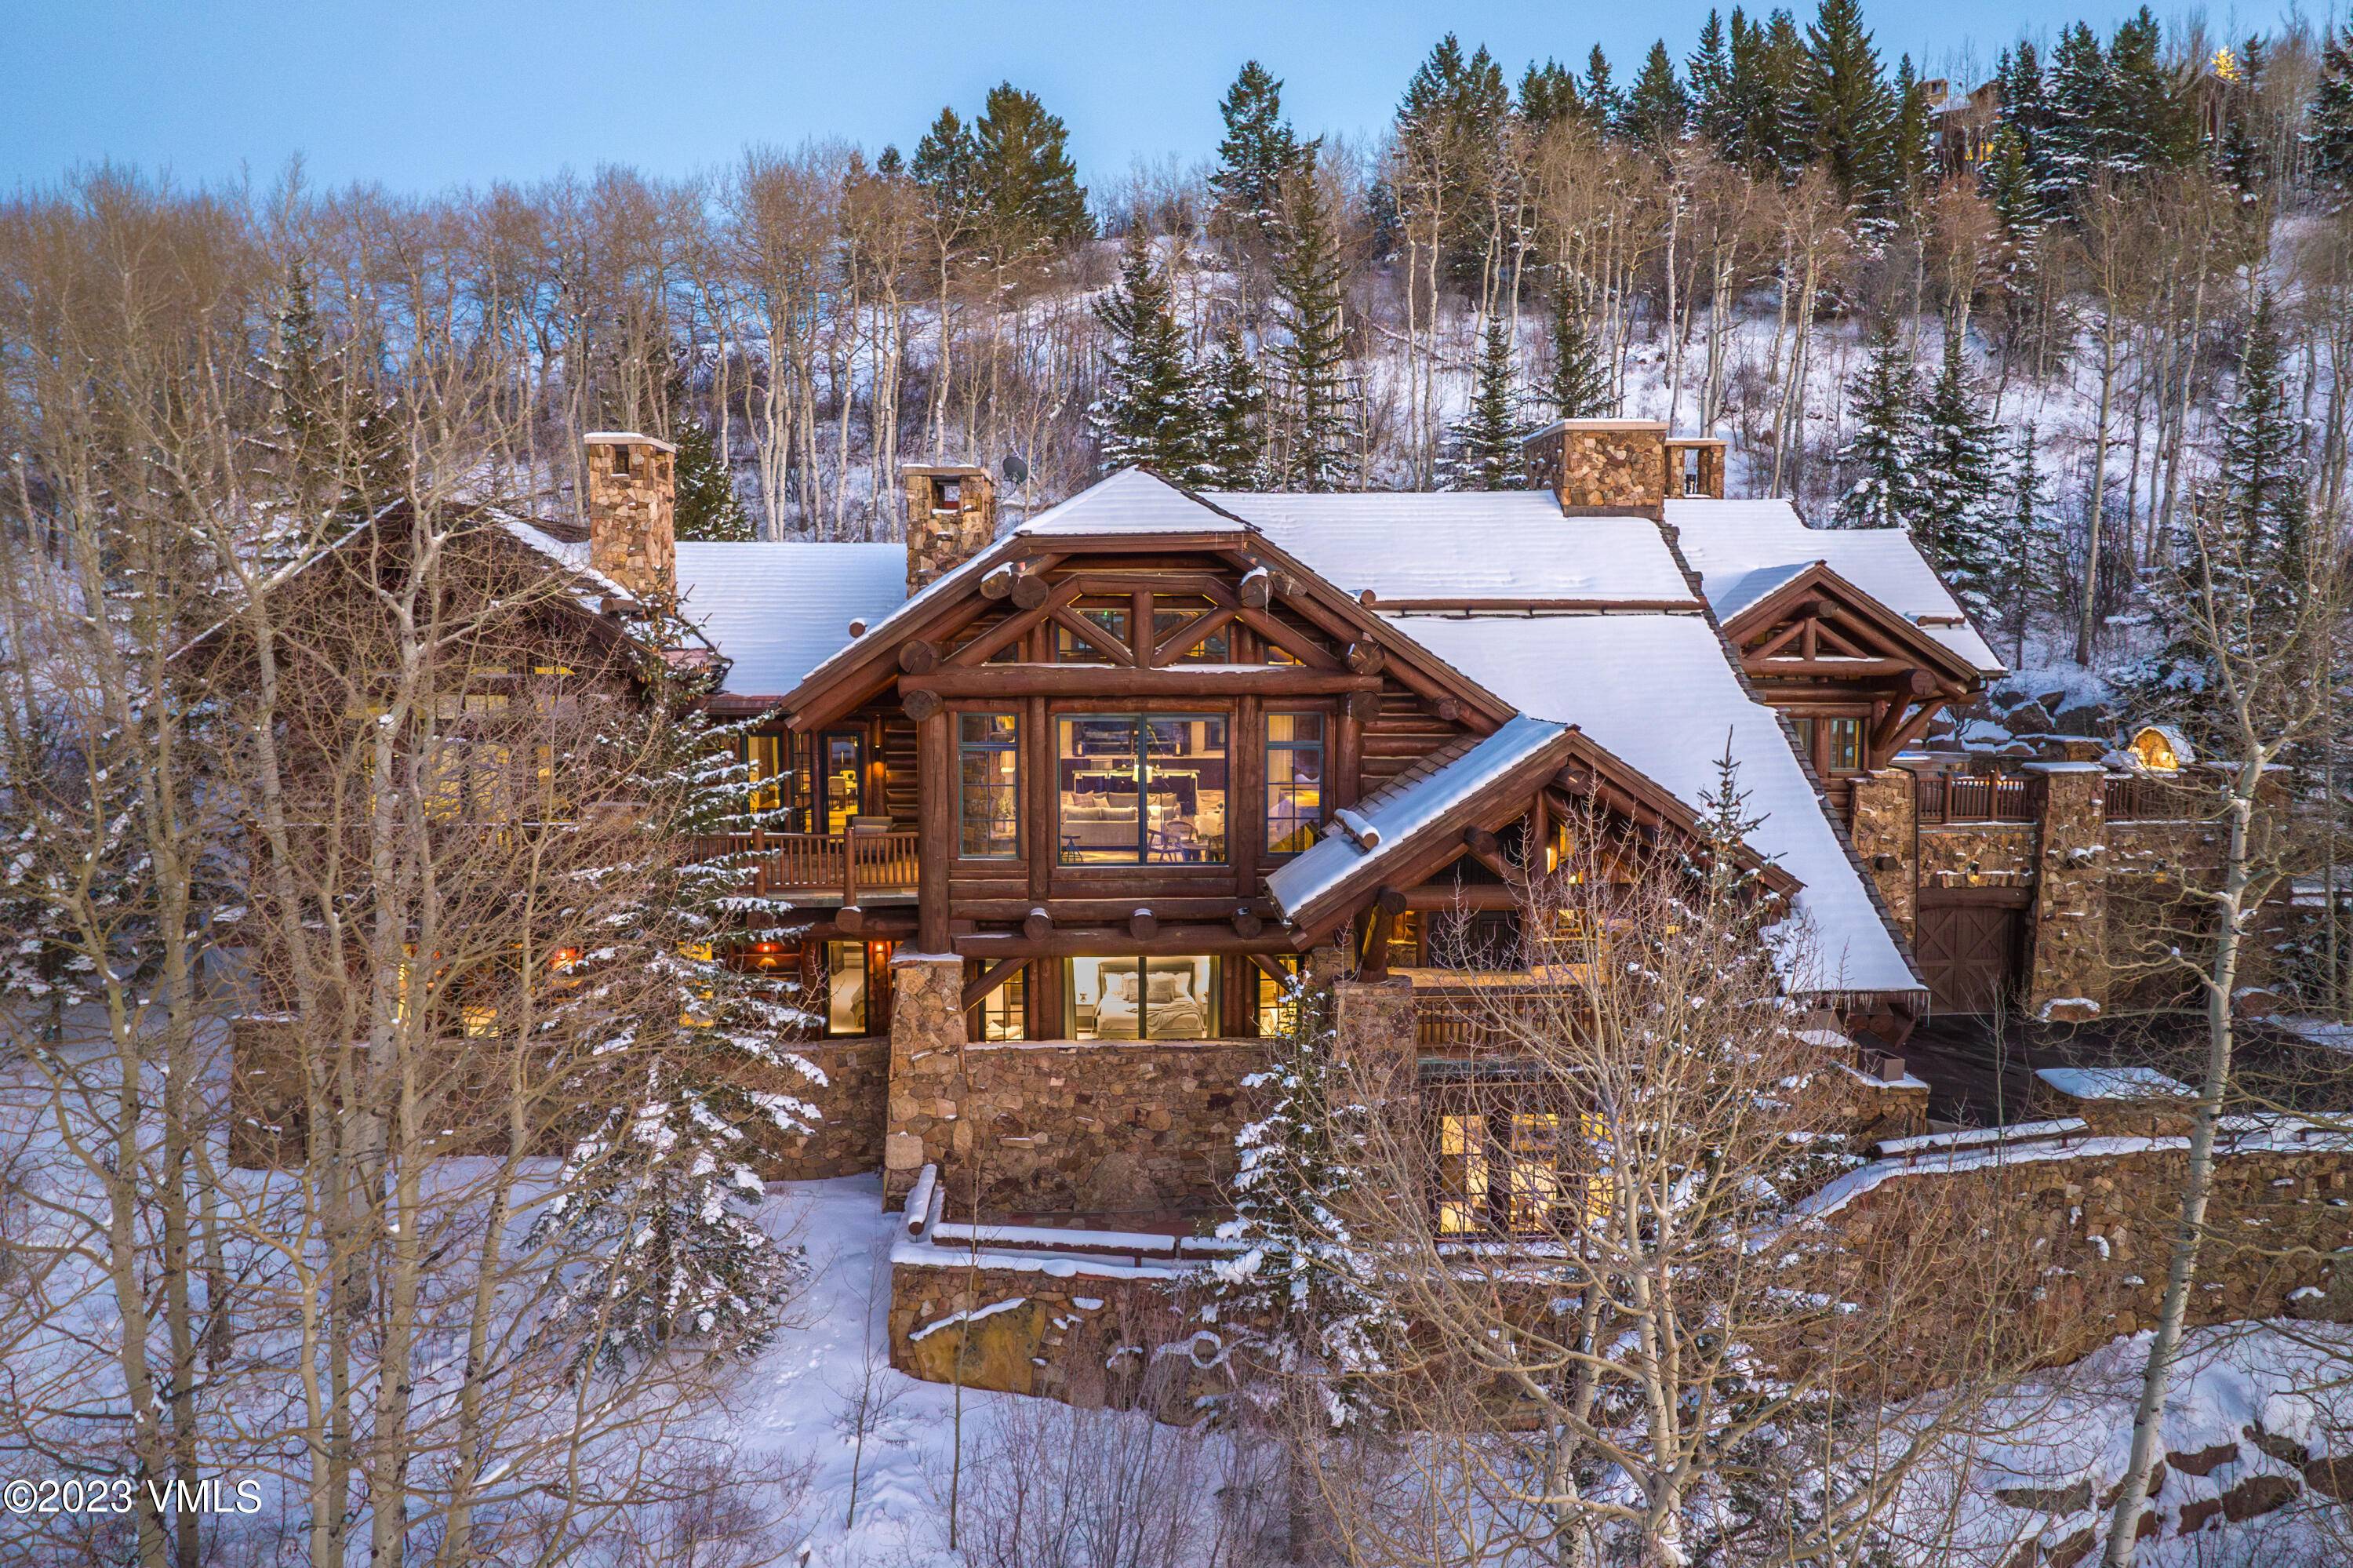 Contemporary meets rustic in this luxurious mountainside retreat with ski in ski out access to Bachelor Gulch on Beaver Creek Mountain.